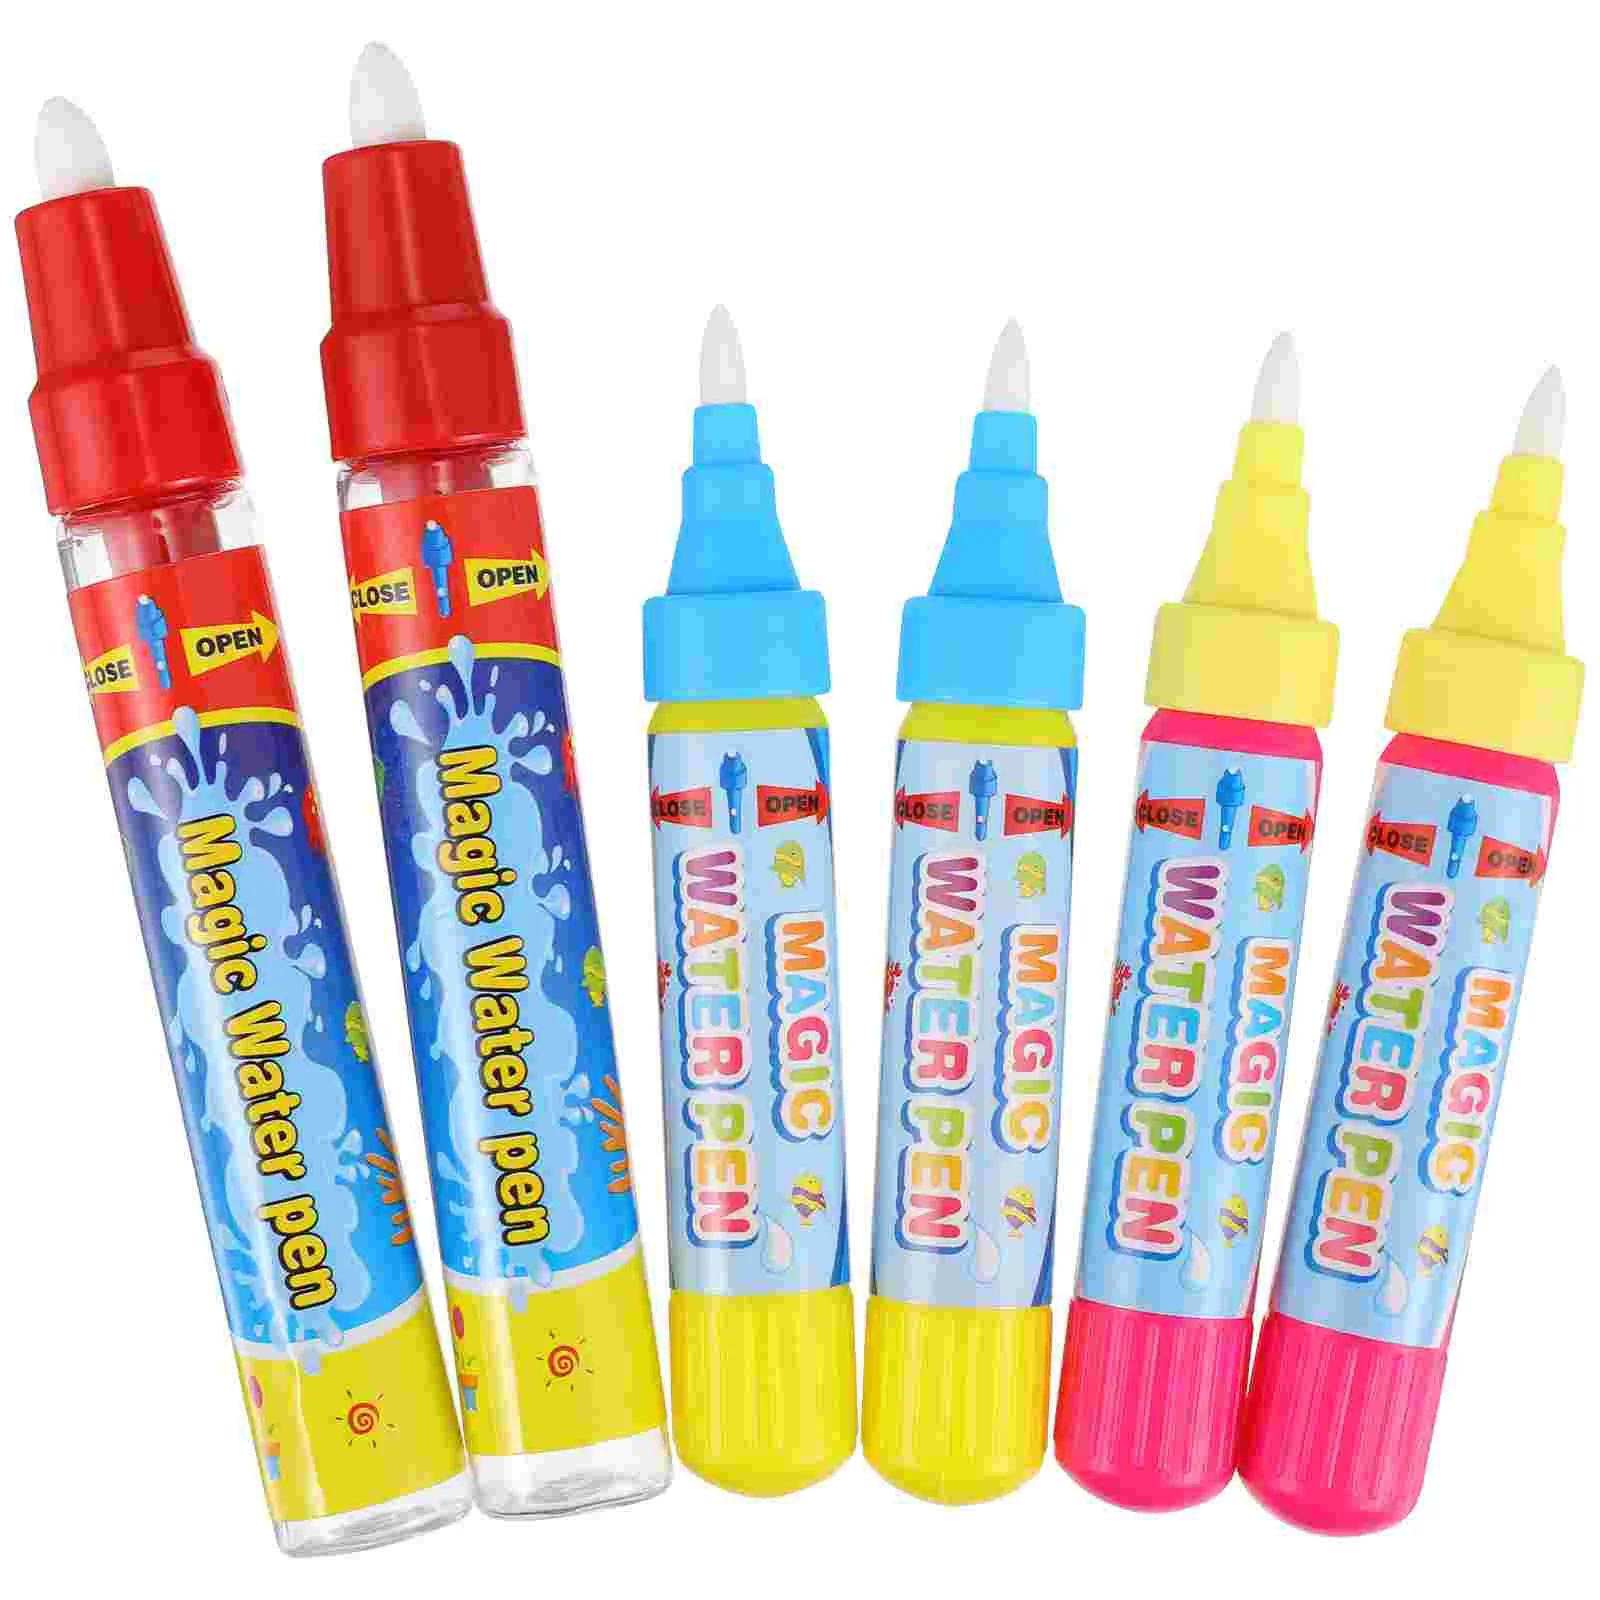 

6 Pcs Water Pens Water Graffiti Painting Pens Replacement Water Drawing Markers Pens for Toddlers Kids Children